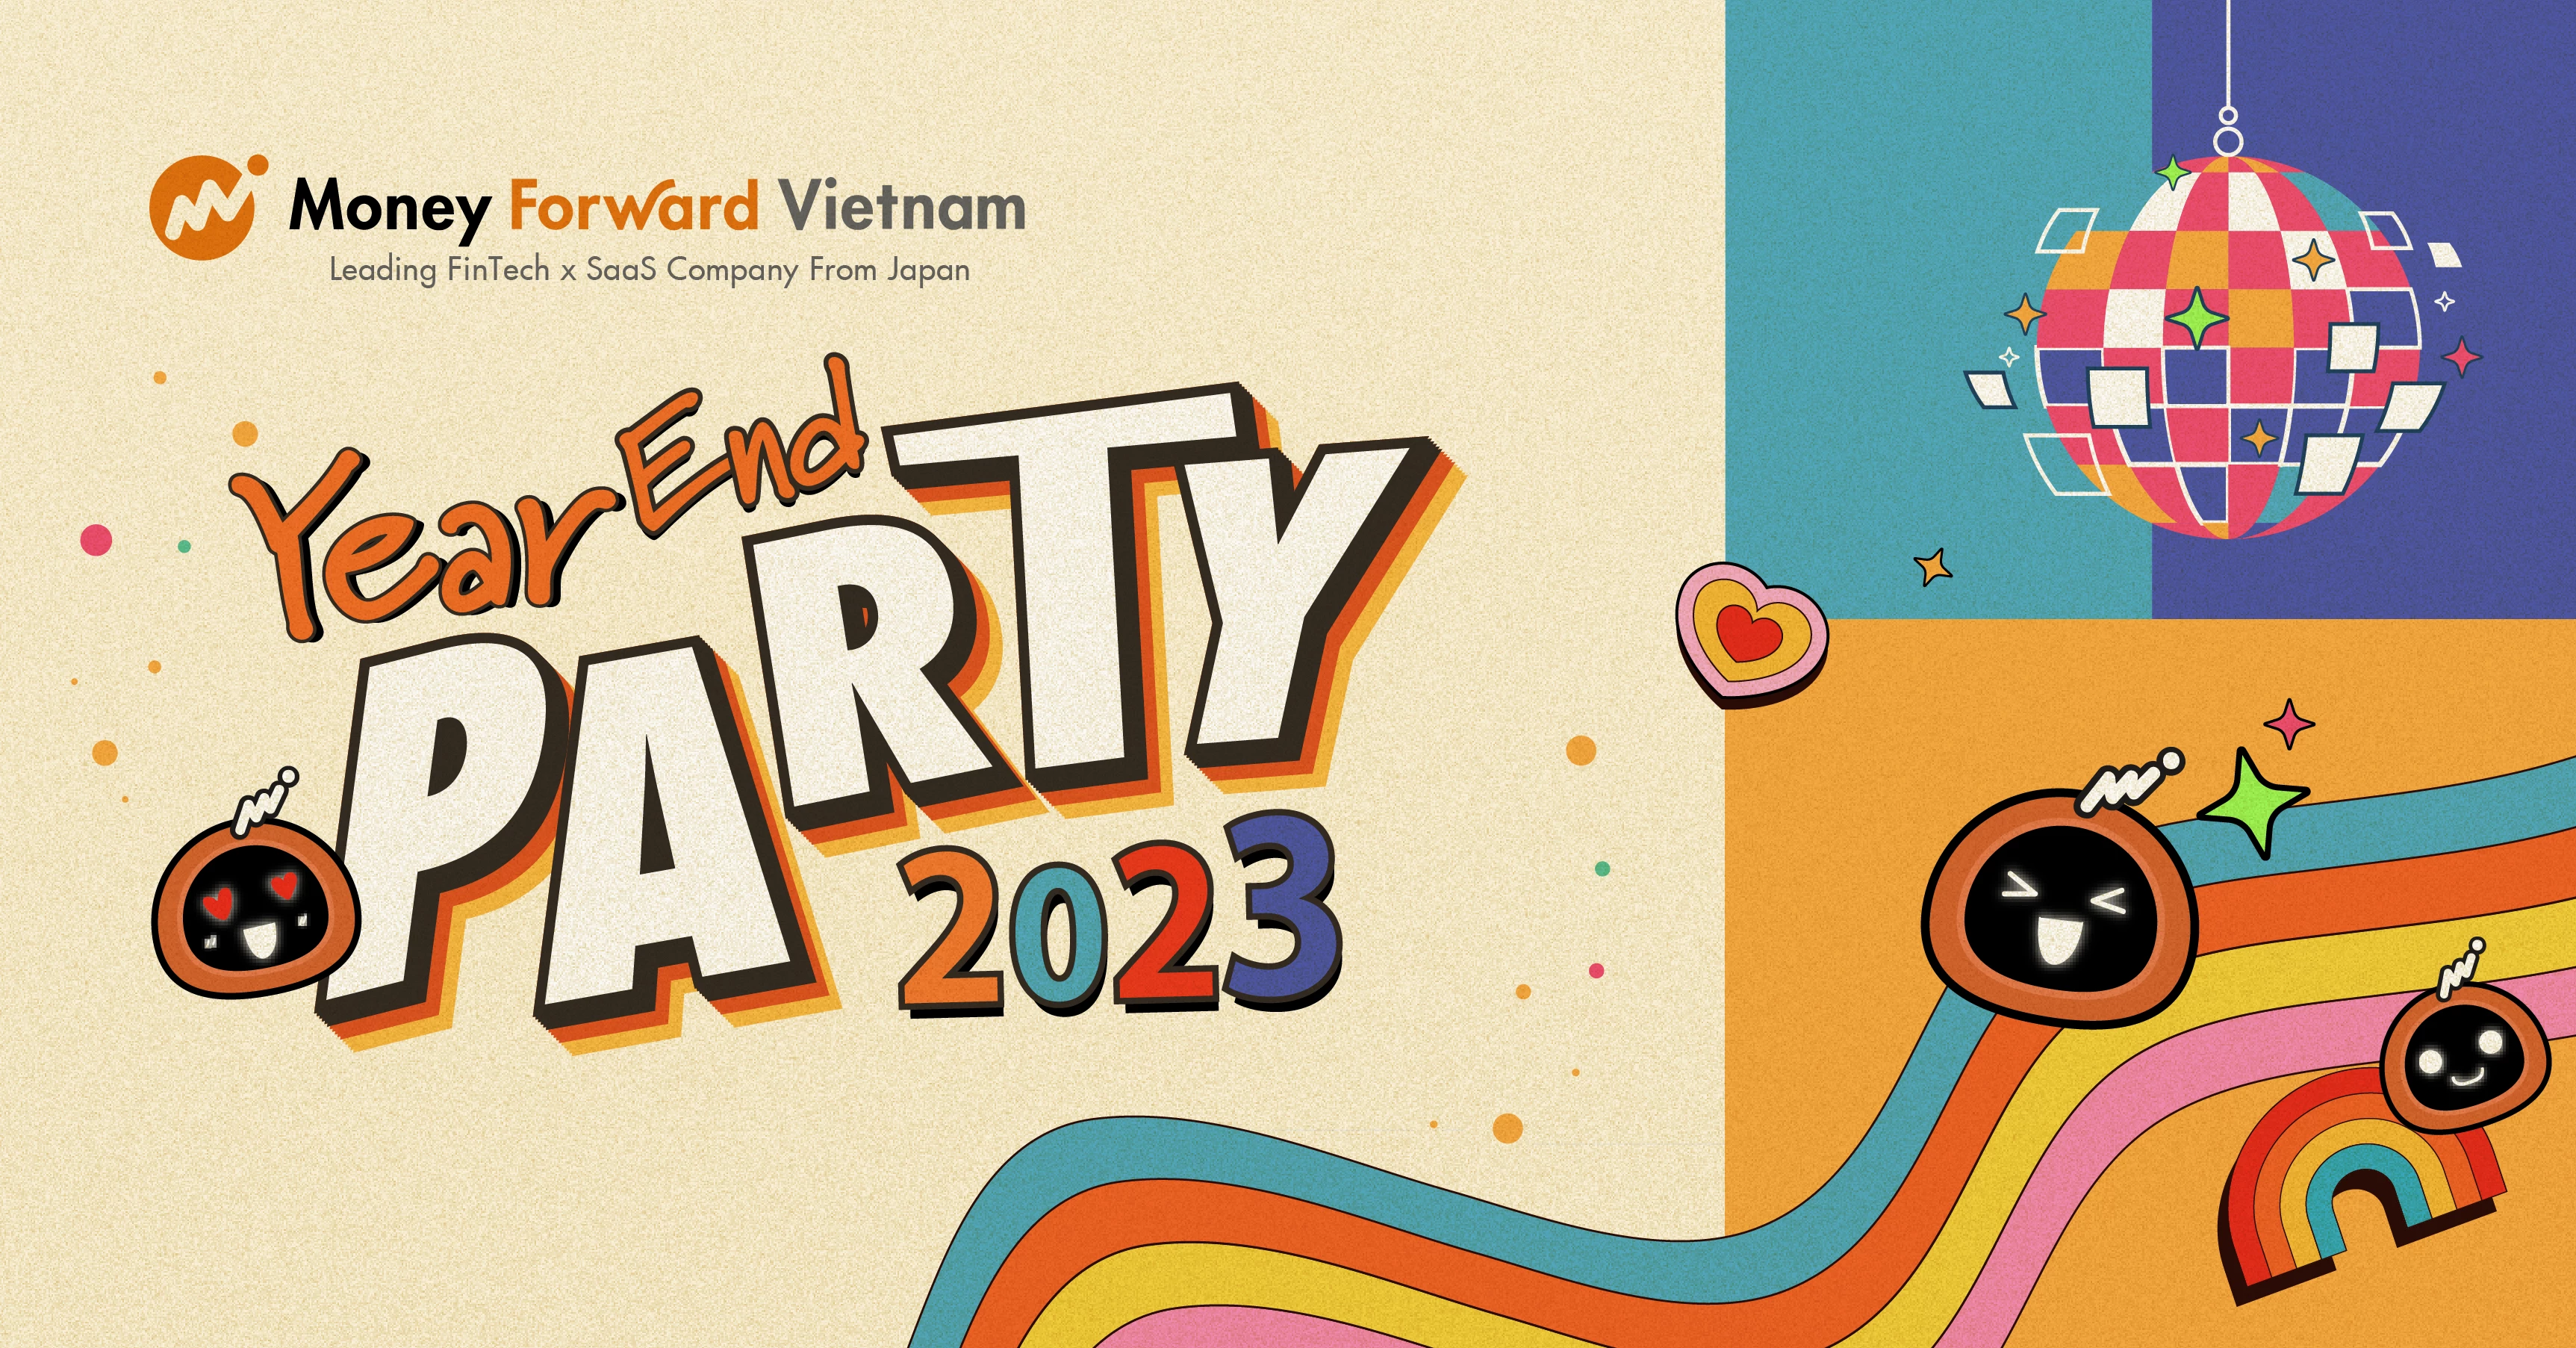 MFV Year-End 2023: Let's Party Together!